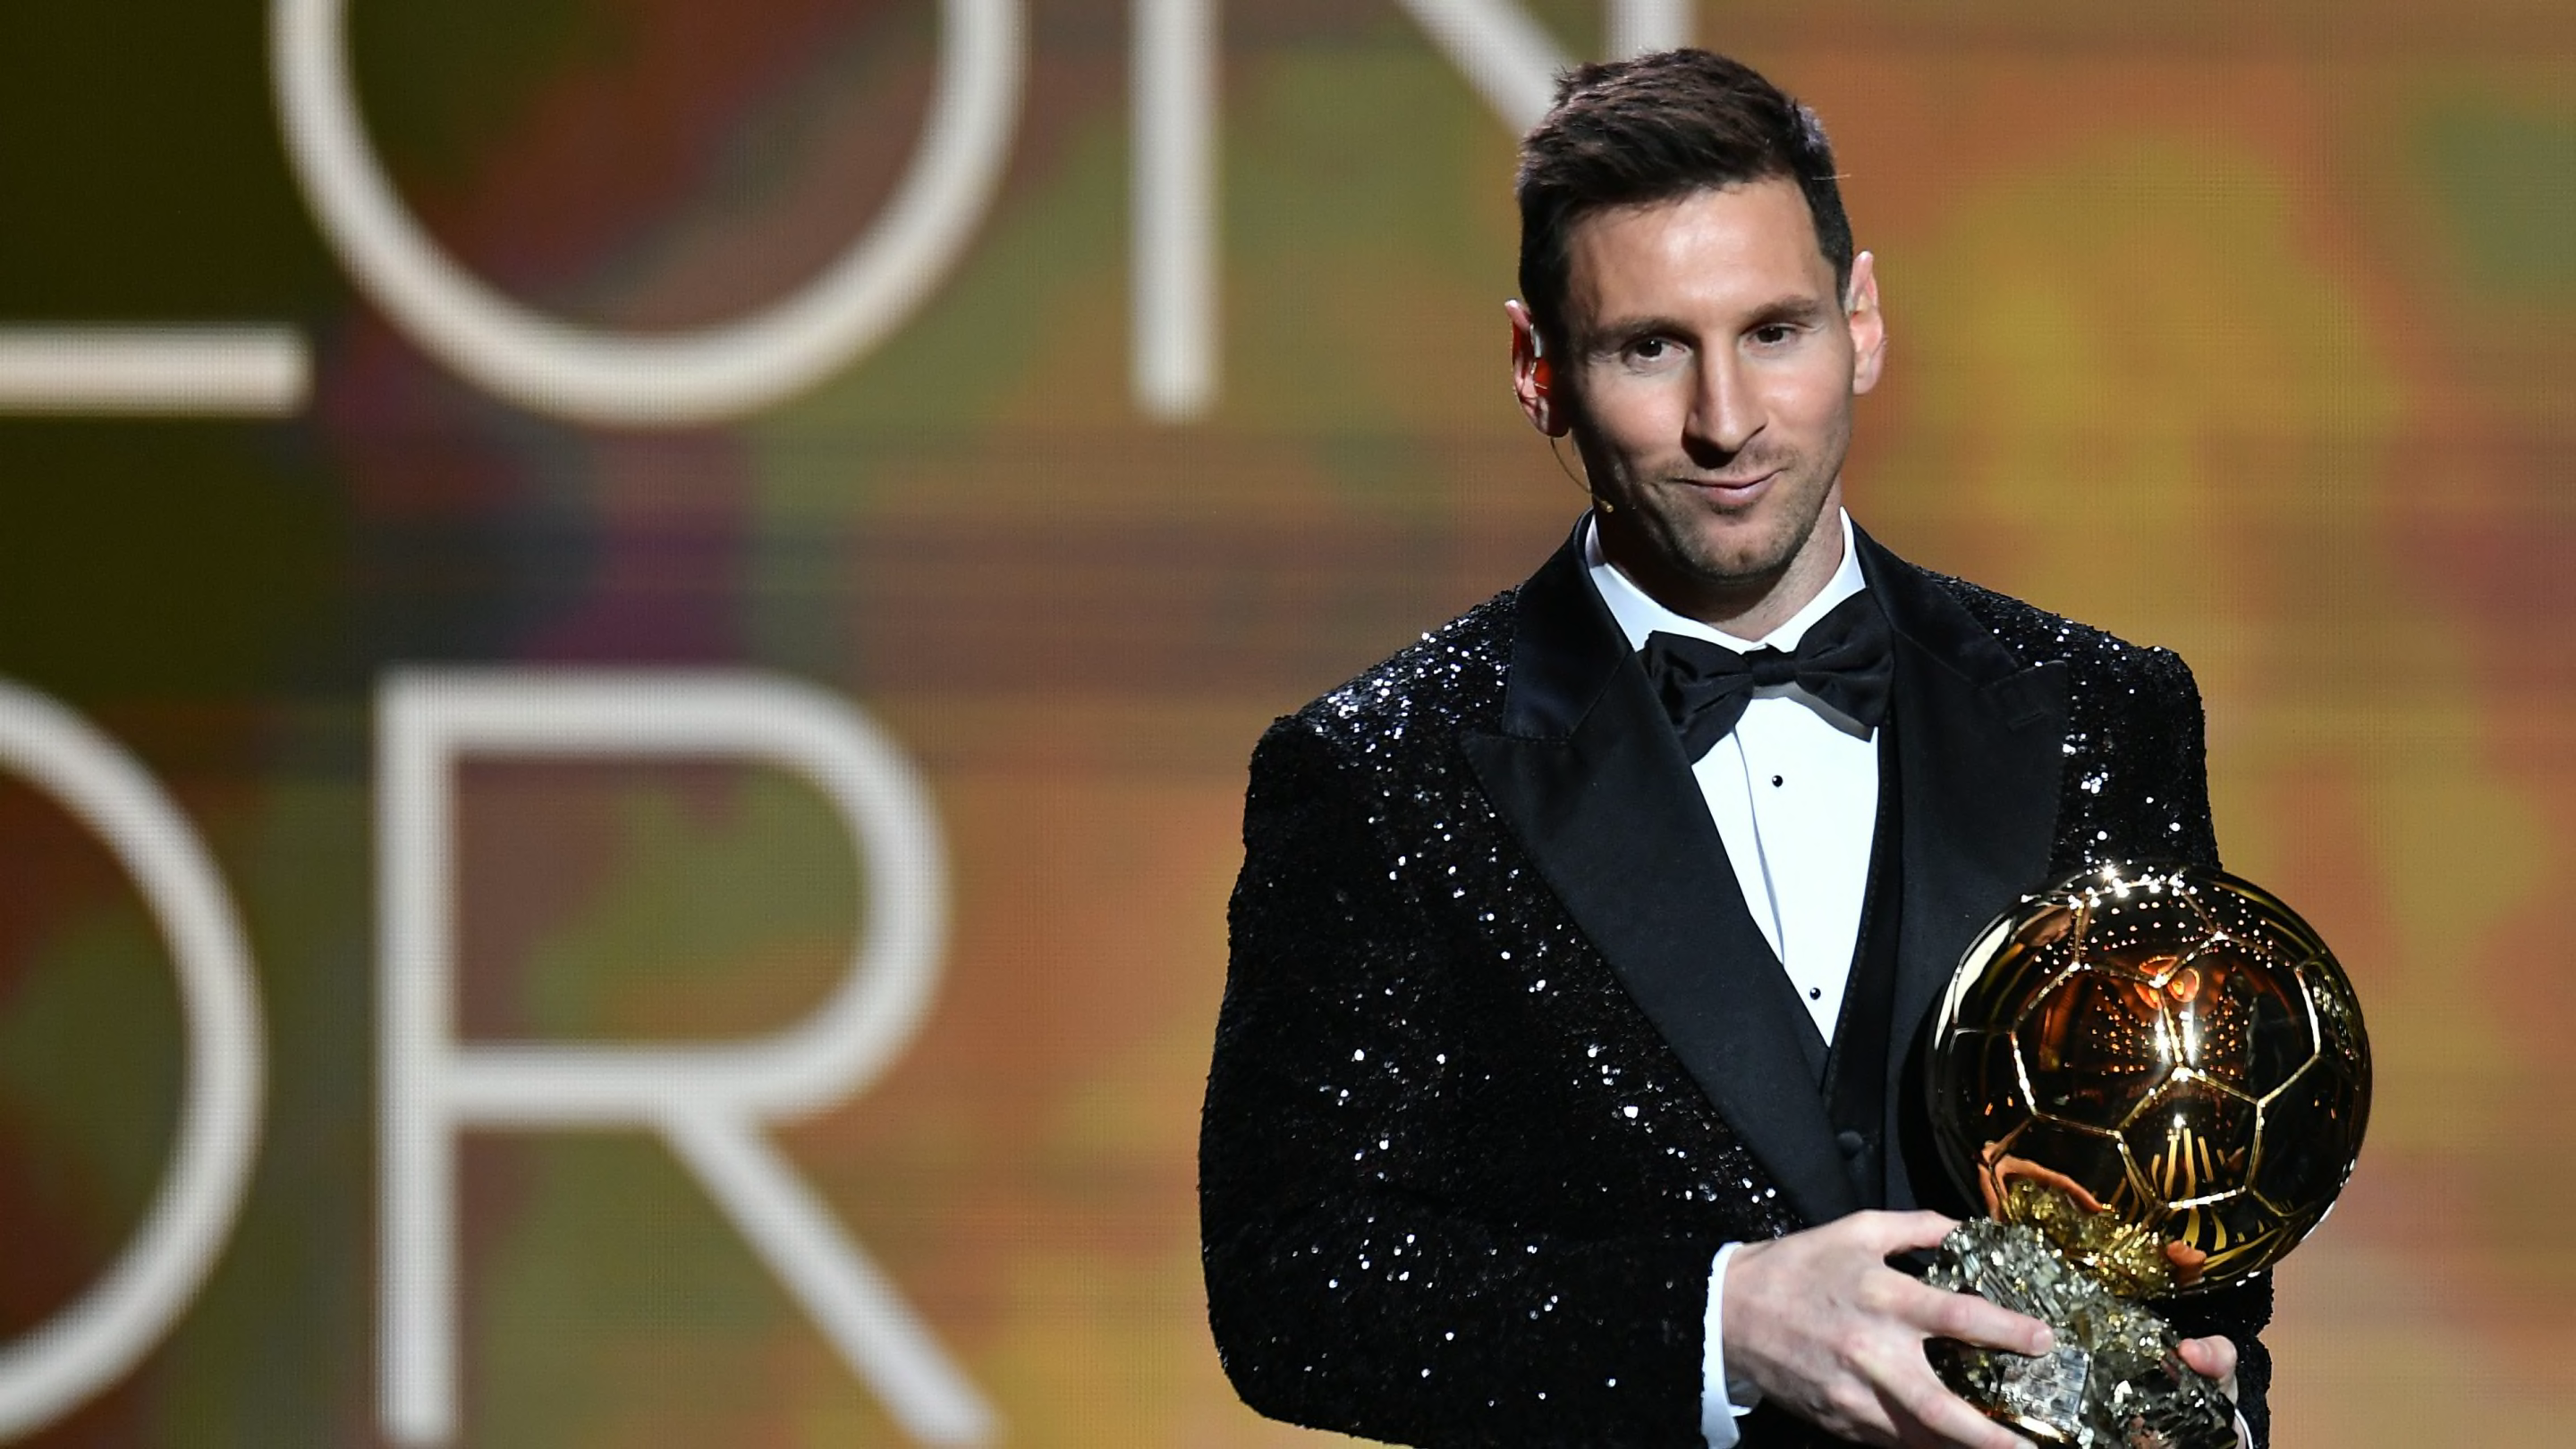 Lionel Messi has 'cemented' the Ballon d'Or with World Cup win